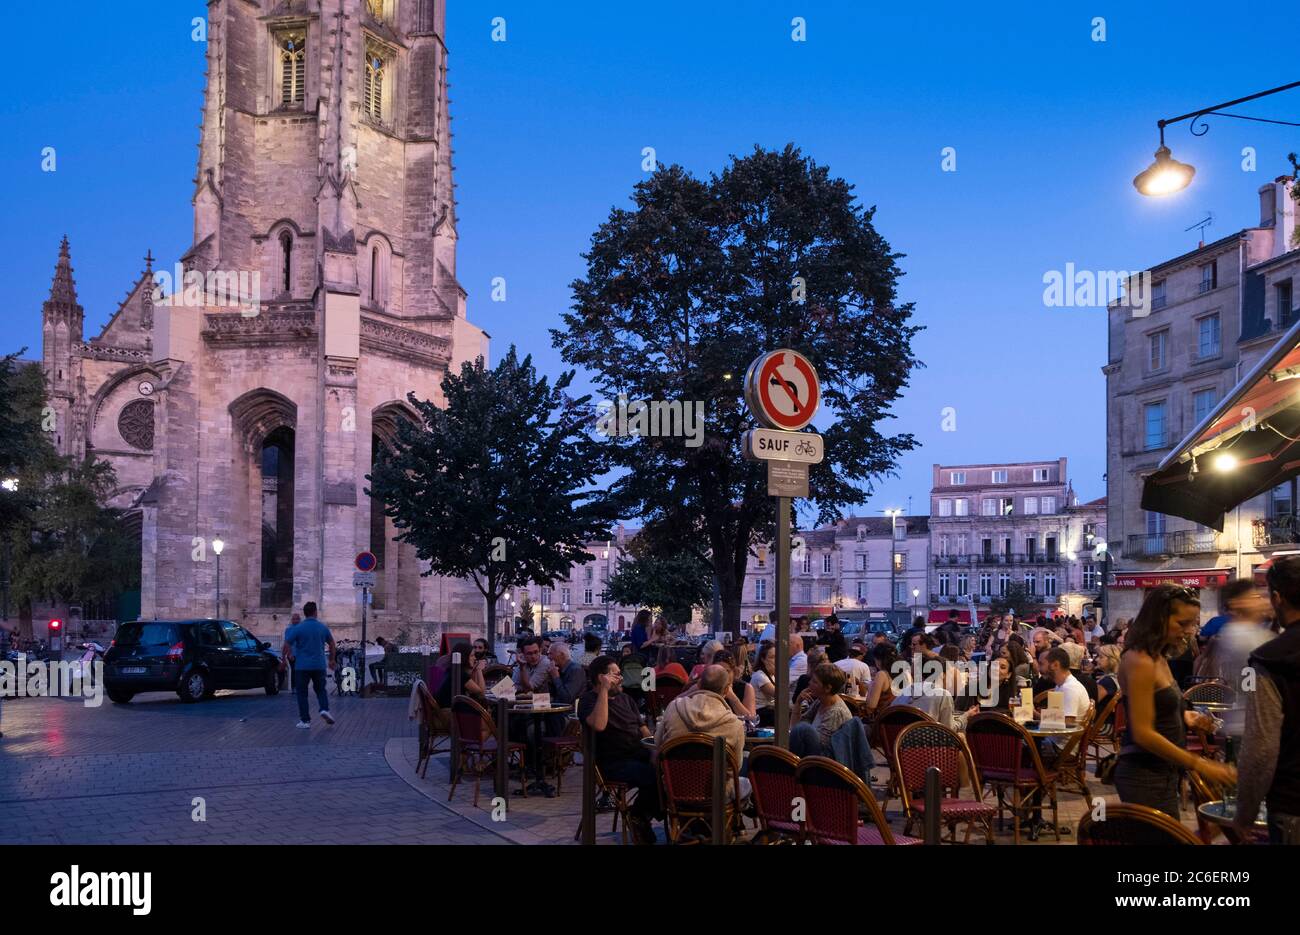 St-Michel Quarter and Basilica of St. Michael at night, Bordeaux City, France Stock Photo